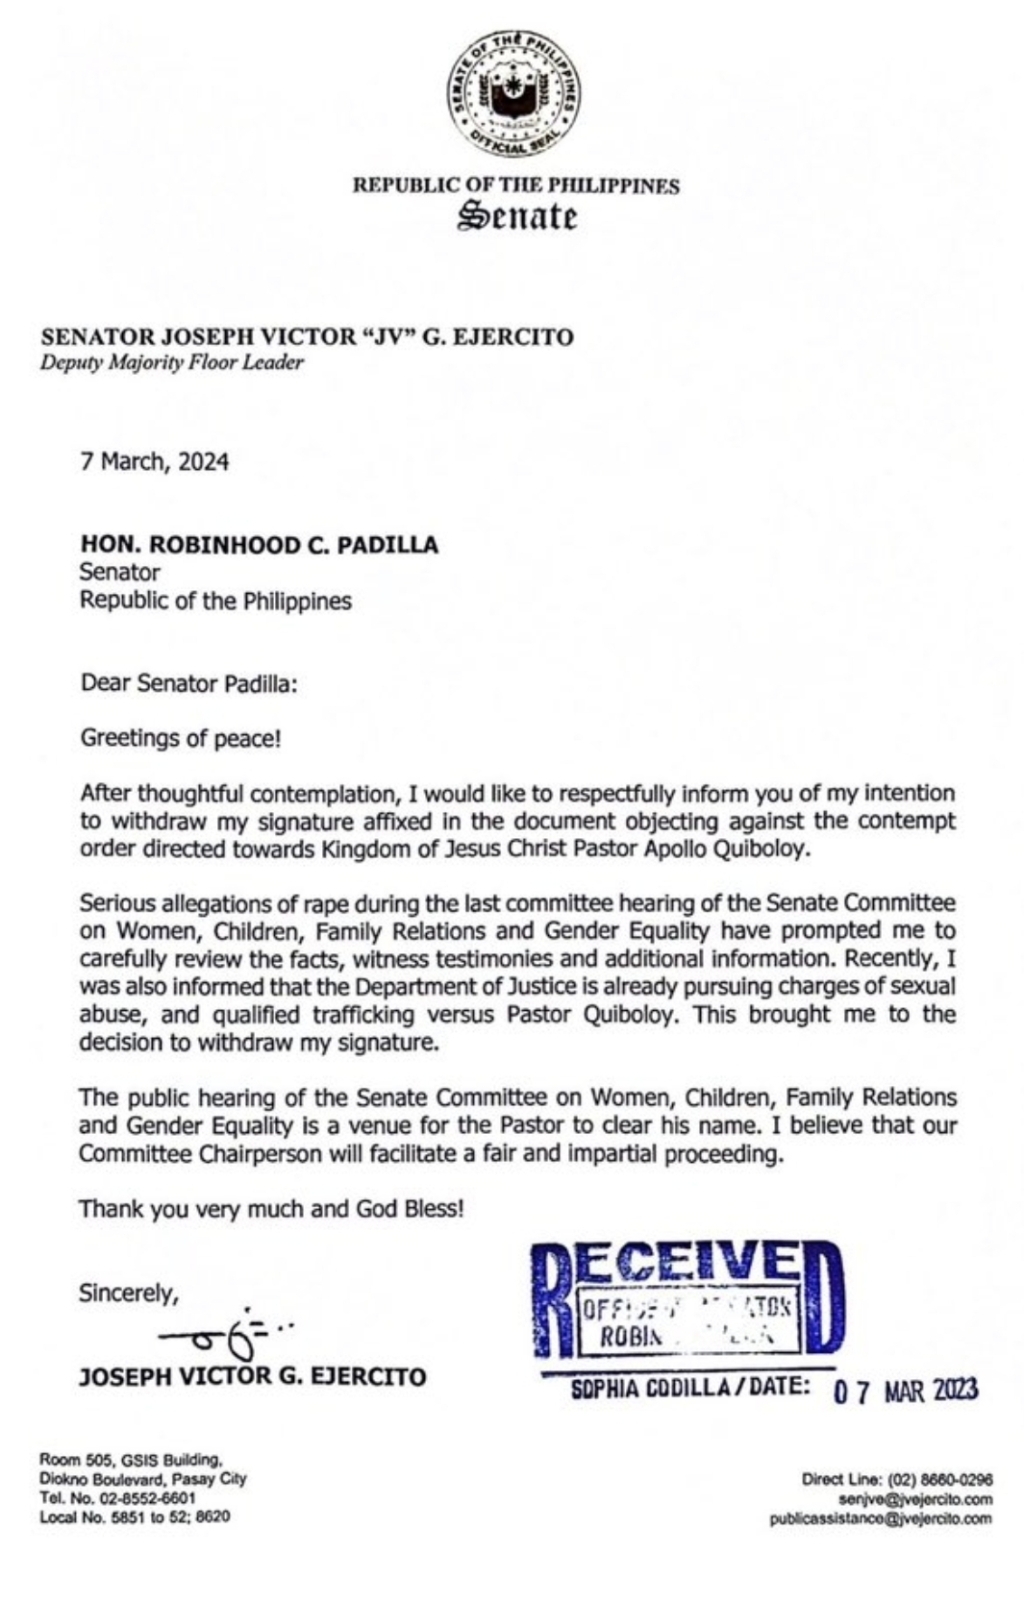 Ejercito withdraw his Signature support on Quiboloy